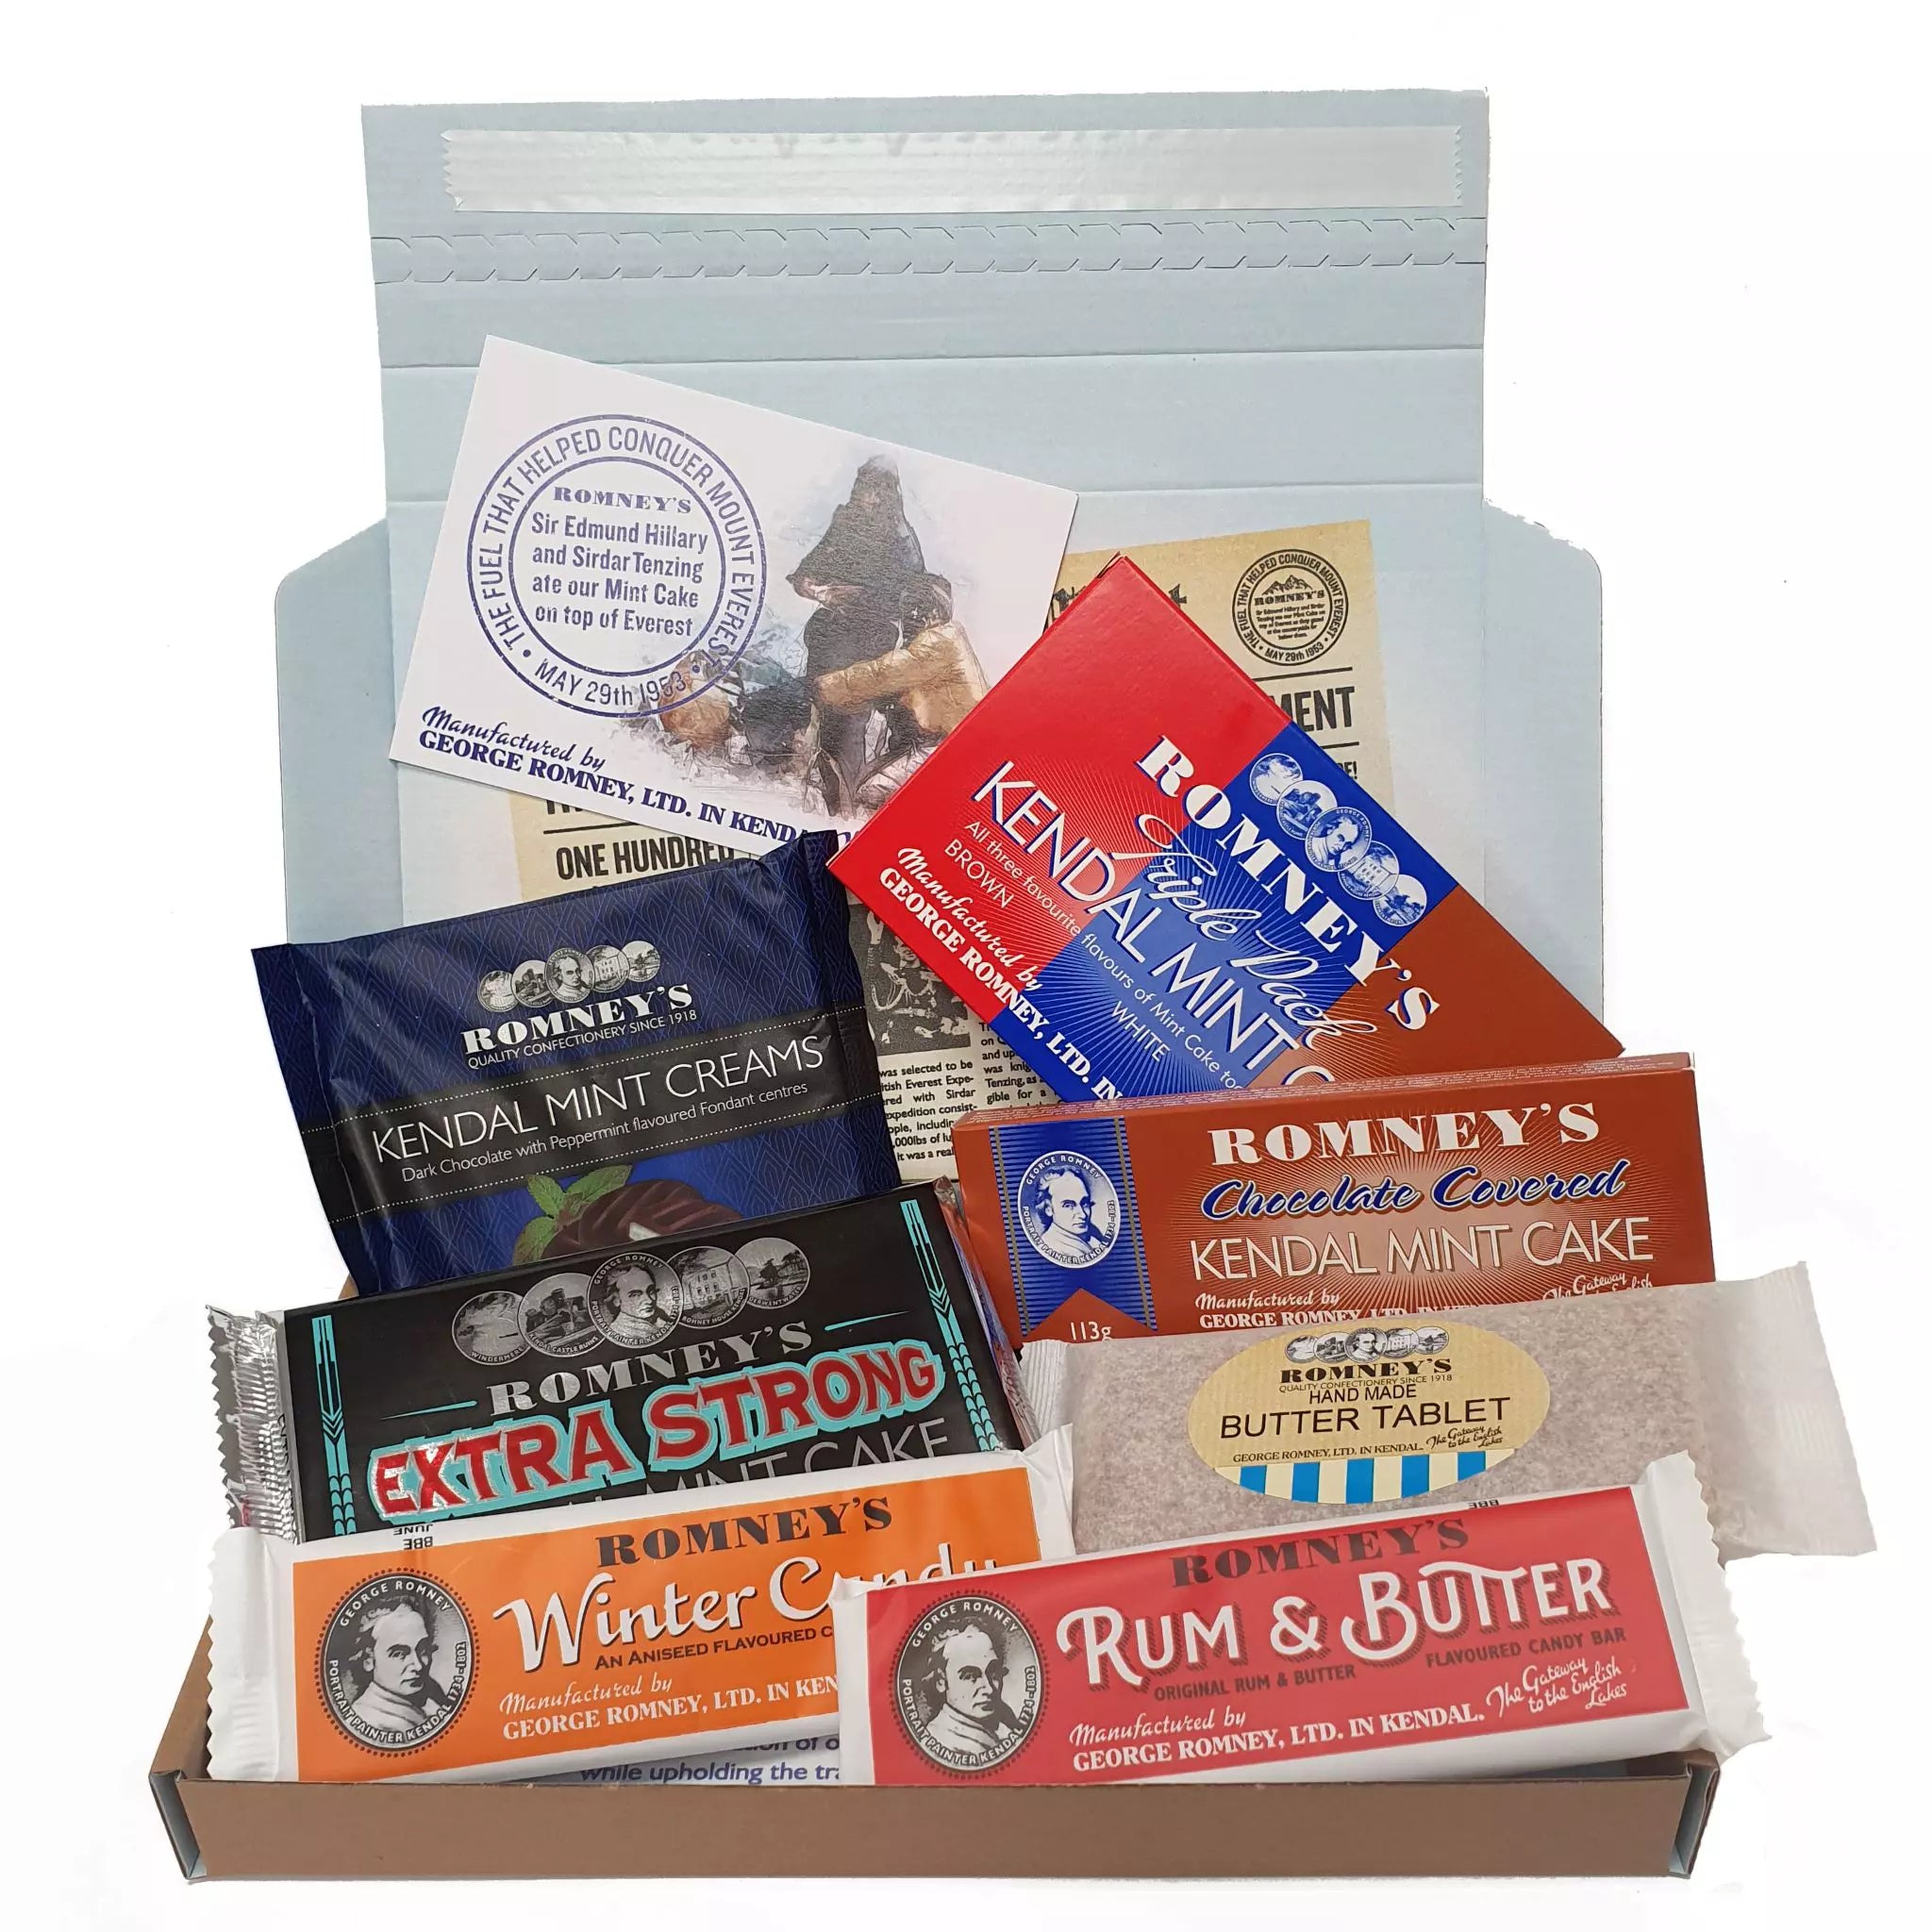 An open rectangular cardboard box containing a variety of Romney's confectionery products such as: Rum & Butter Bar, Winter Candy Bar, Butter Tablet Bar, Extra Strong Kendal Mint Cake Bar, 113g Chocolate Coated Kendal Mint Cake Bar, 227g Triple Kendal Mint Cake, Kendal Mint Creams